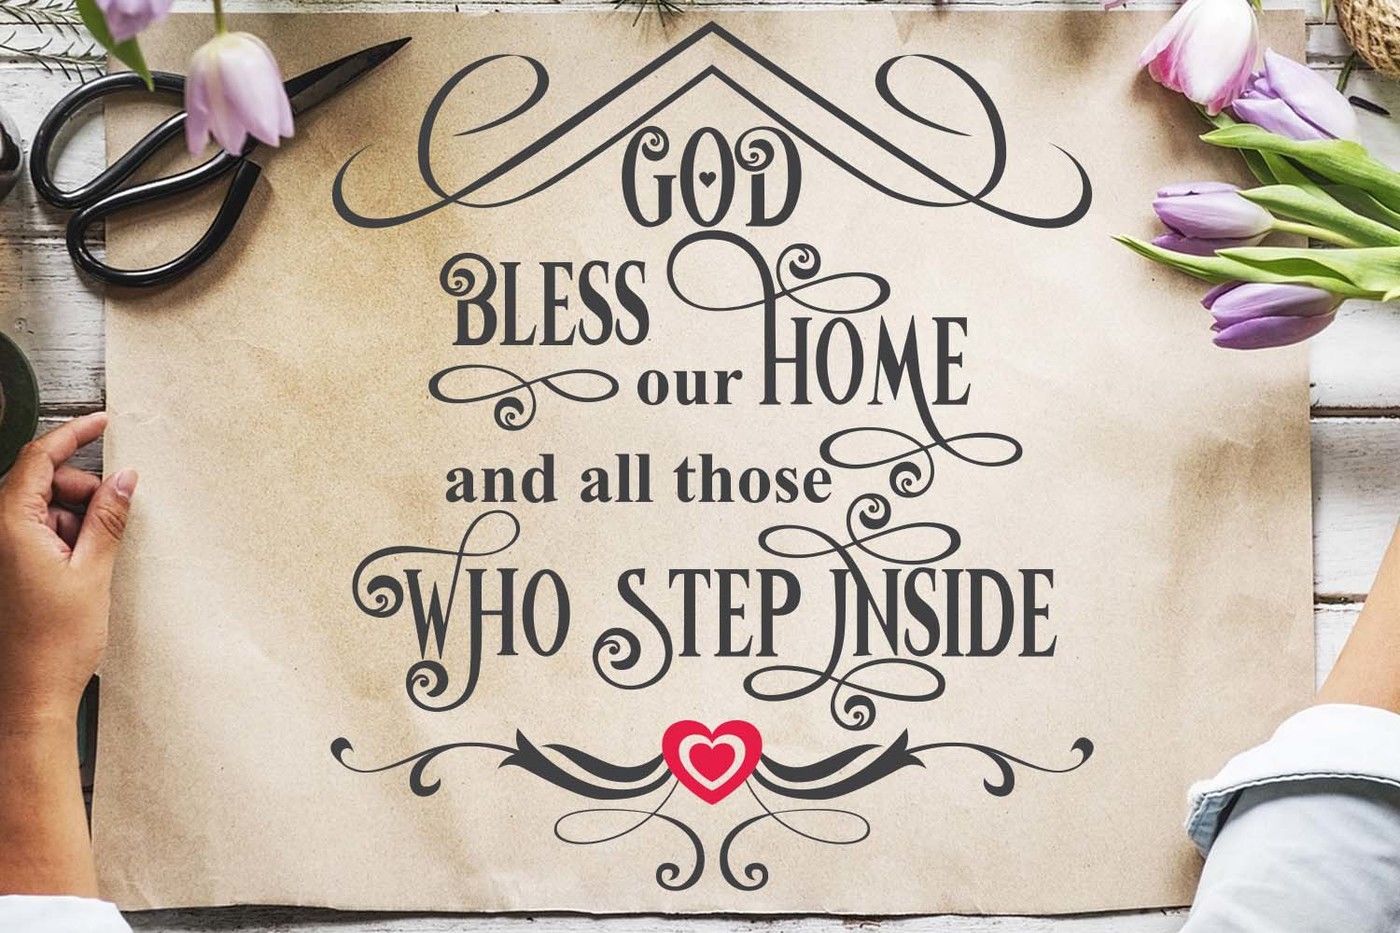 Bless Our Home Svg House Svg Nest Svg Printable Quote Words By Kartcreation Thehungryjpeg Com